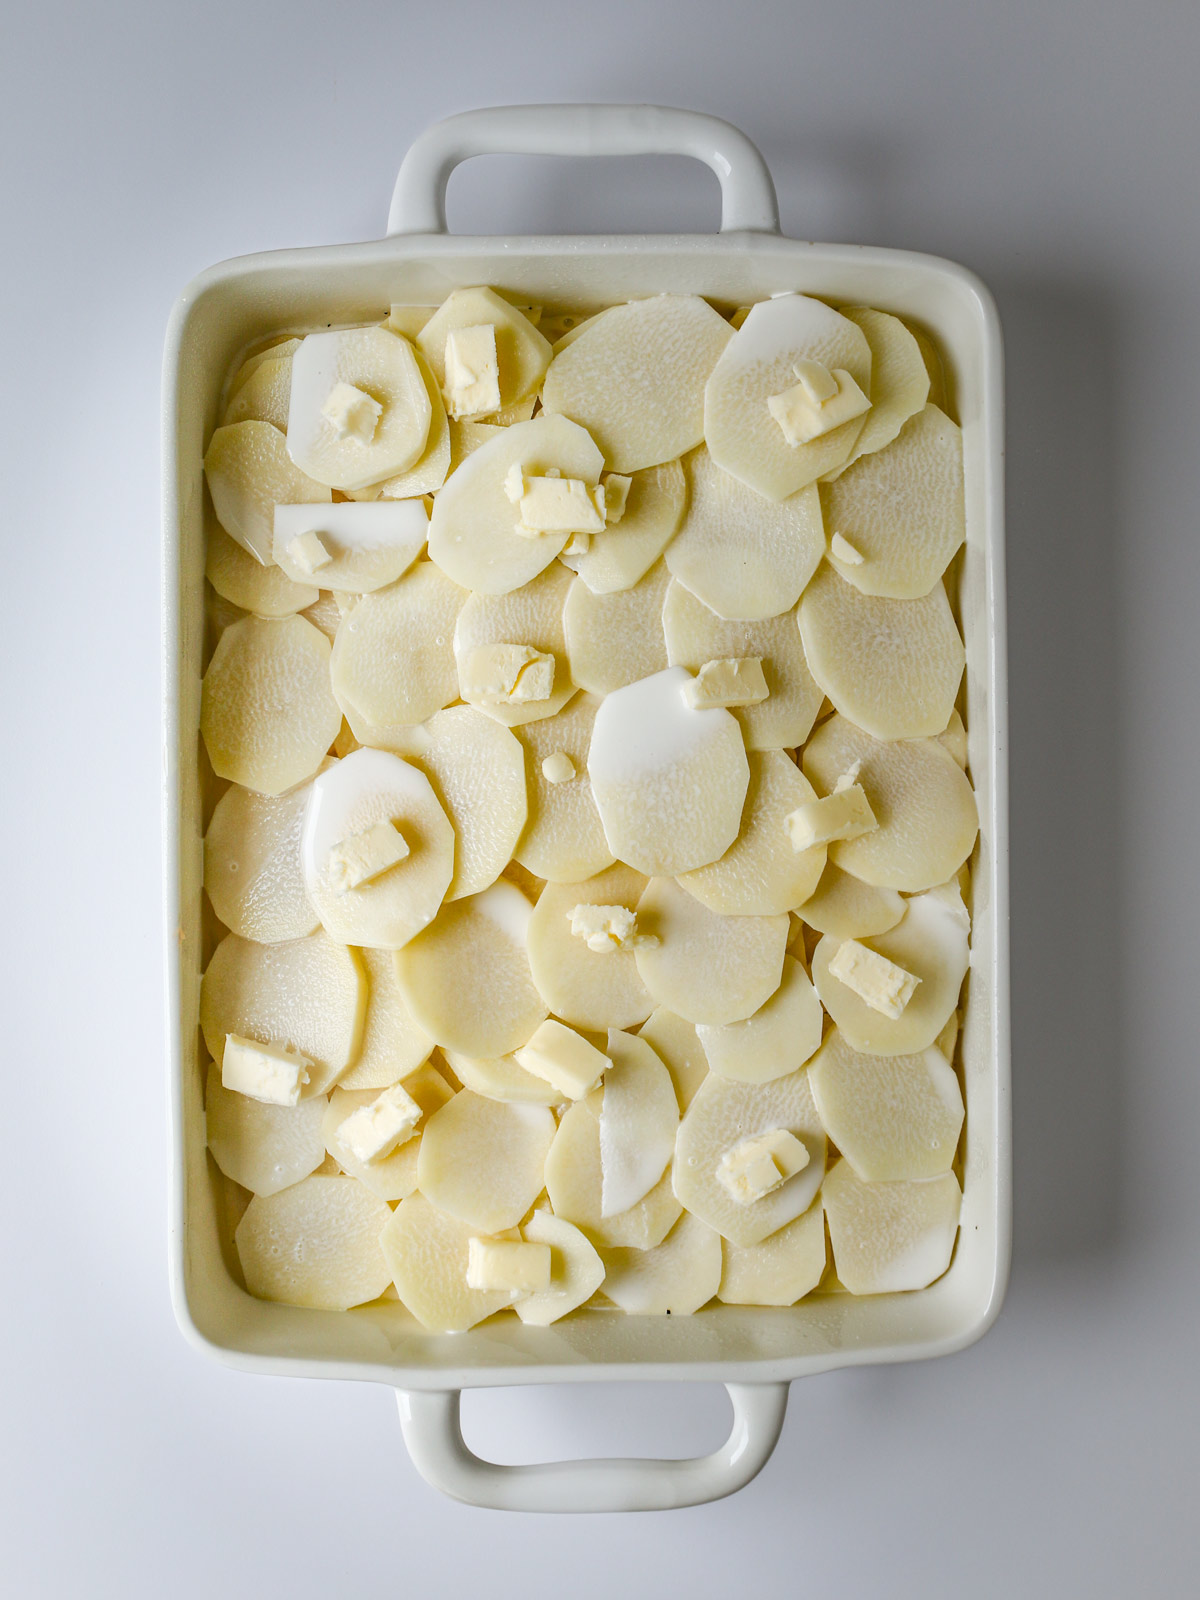 pats of butter laid over potatoes and half and half in baking dish.